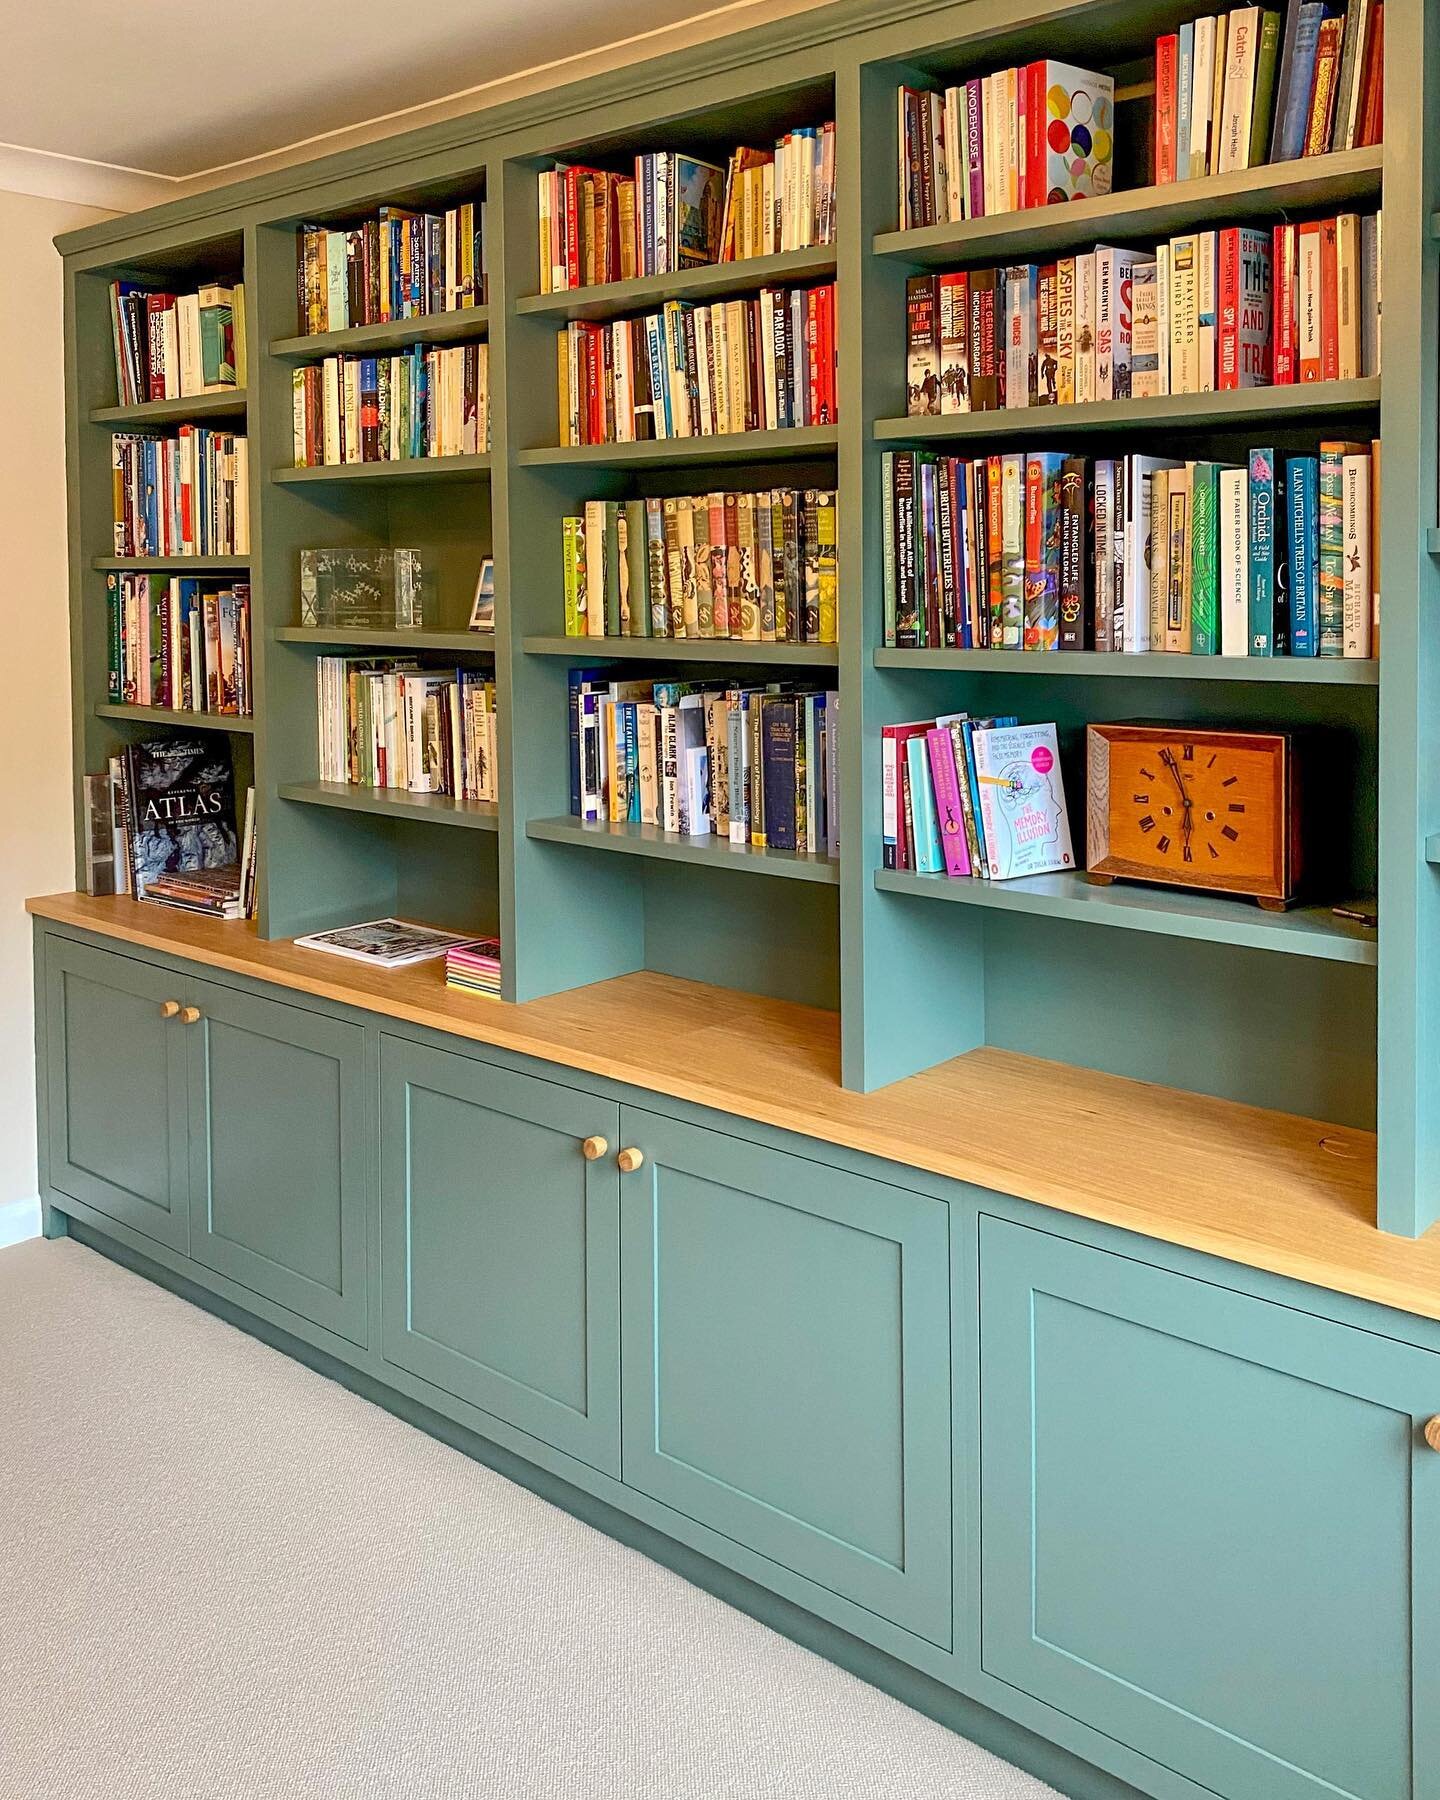 Our client&rsquo;s large collection of books meant they had a very clear idea of how this bookcase would look and how it needed to work for them. Hand painted in Farrow and Ball Green Smoke, with an oiled oak top to the base cabinets, it is now fille